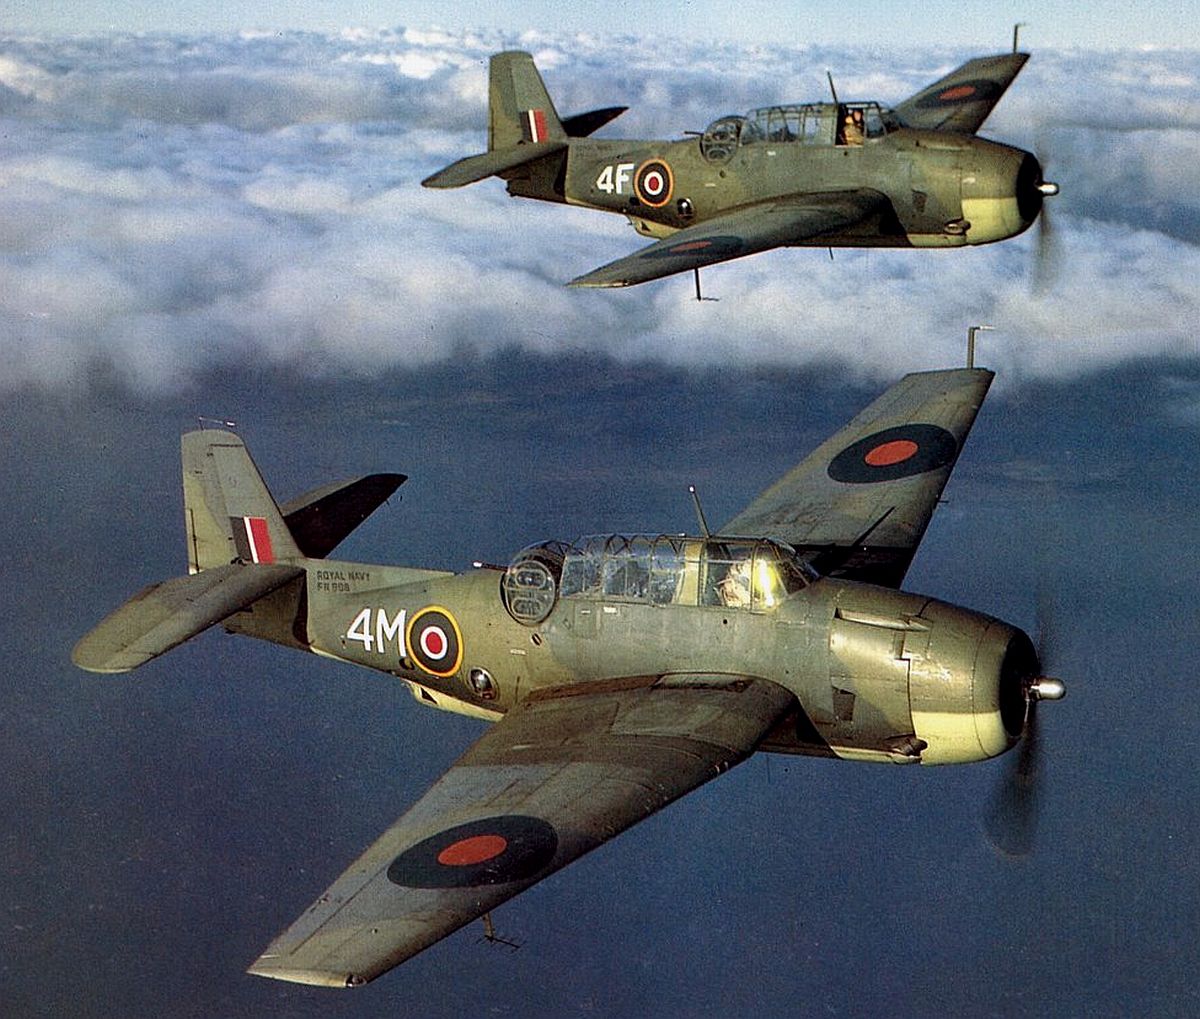 Two TBM-1 Avengers sent to Britain under Lend Lease to become Tarpons of the Royal Navy’s Fleet Air Arm.